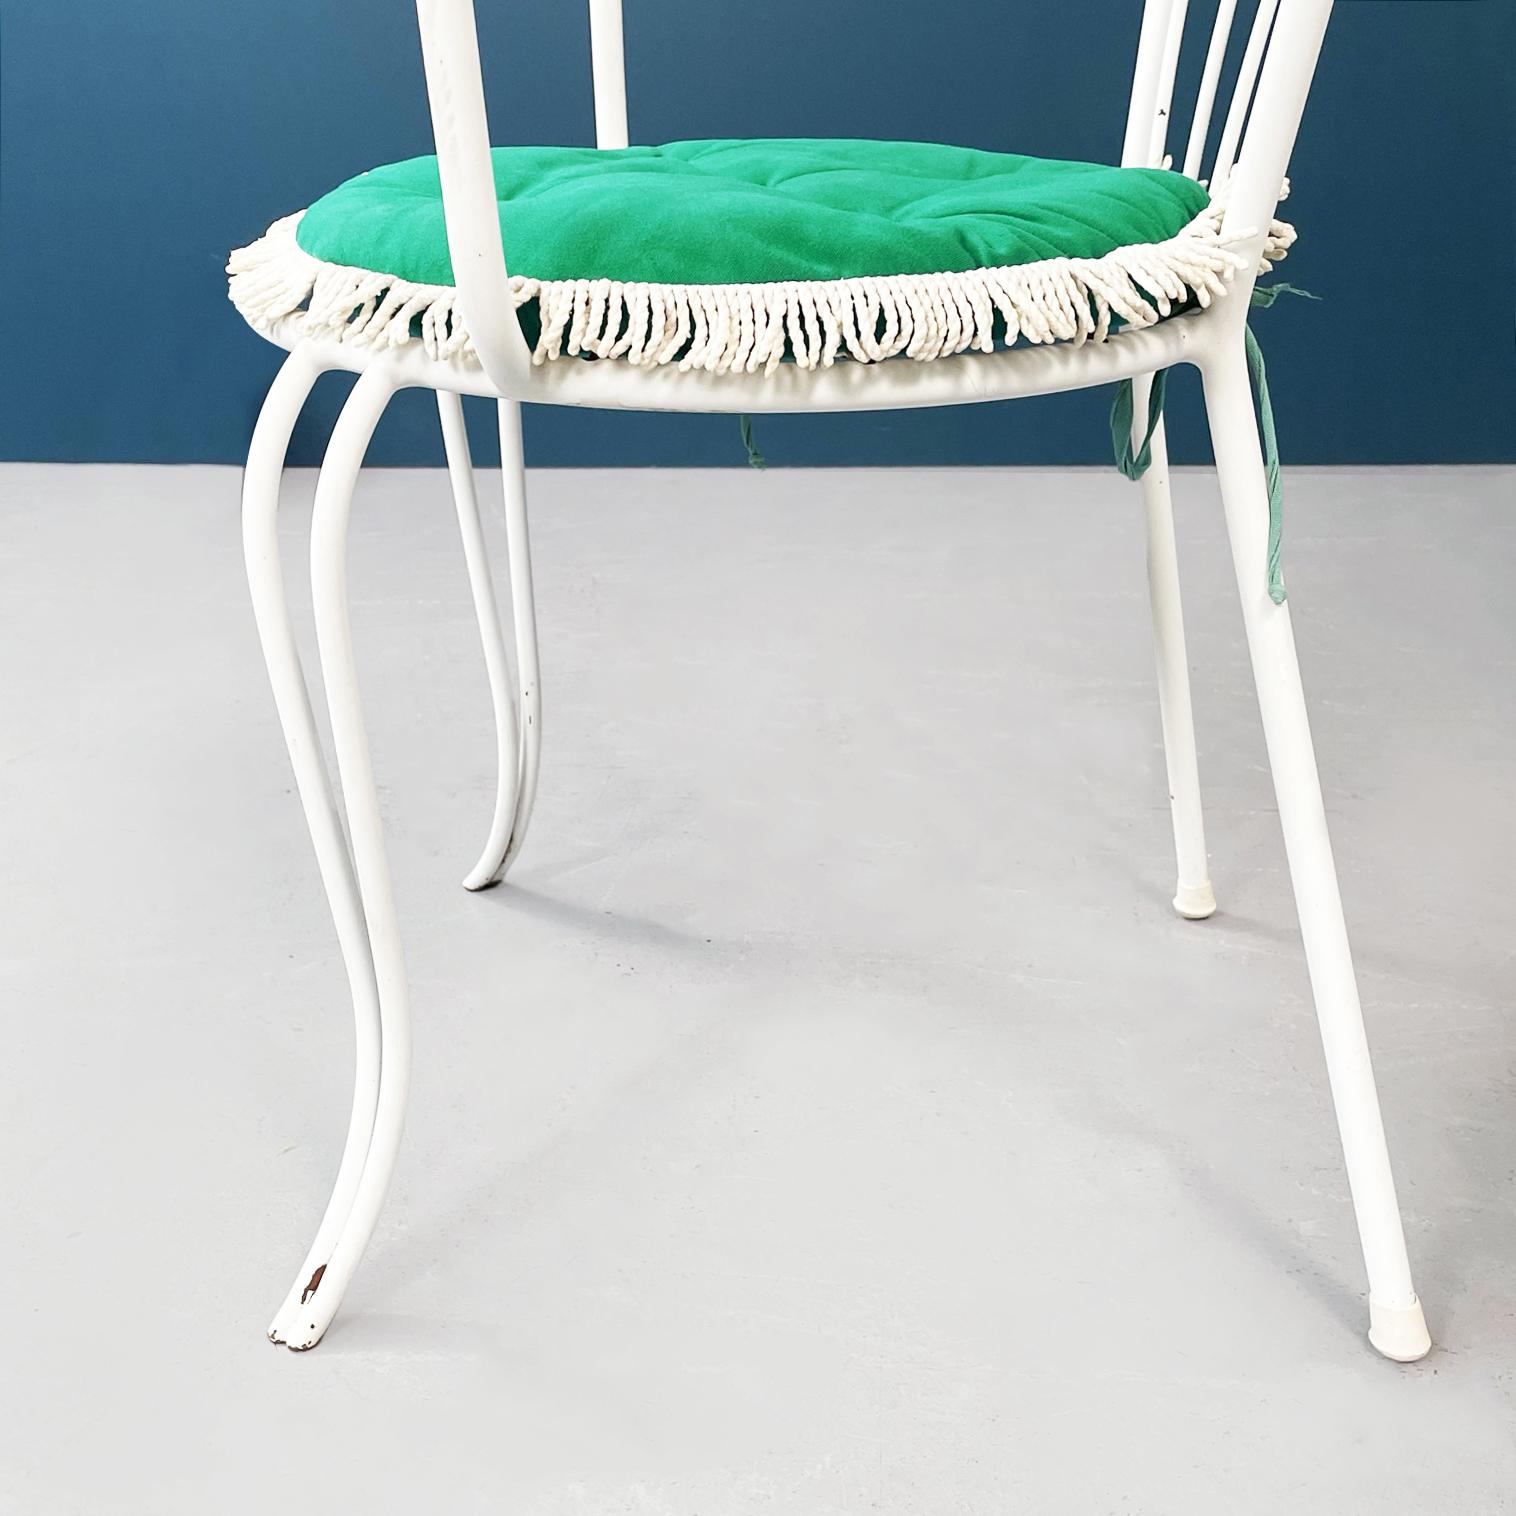 Italian Mid-Century Garden Chairs Table in White Iron, Glass and Fabric, 1960s For Sale 6